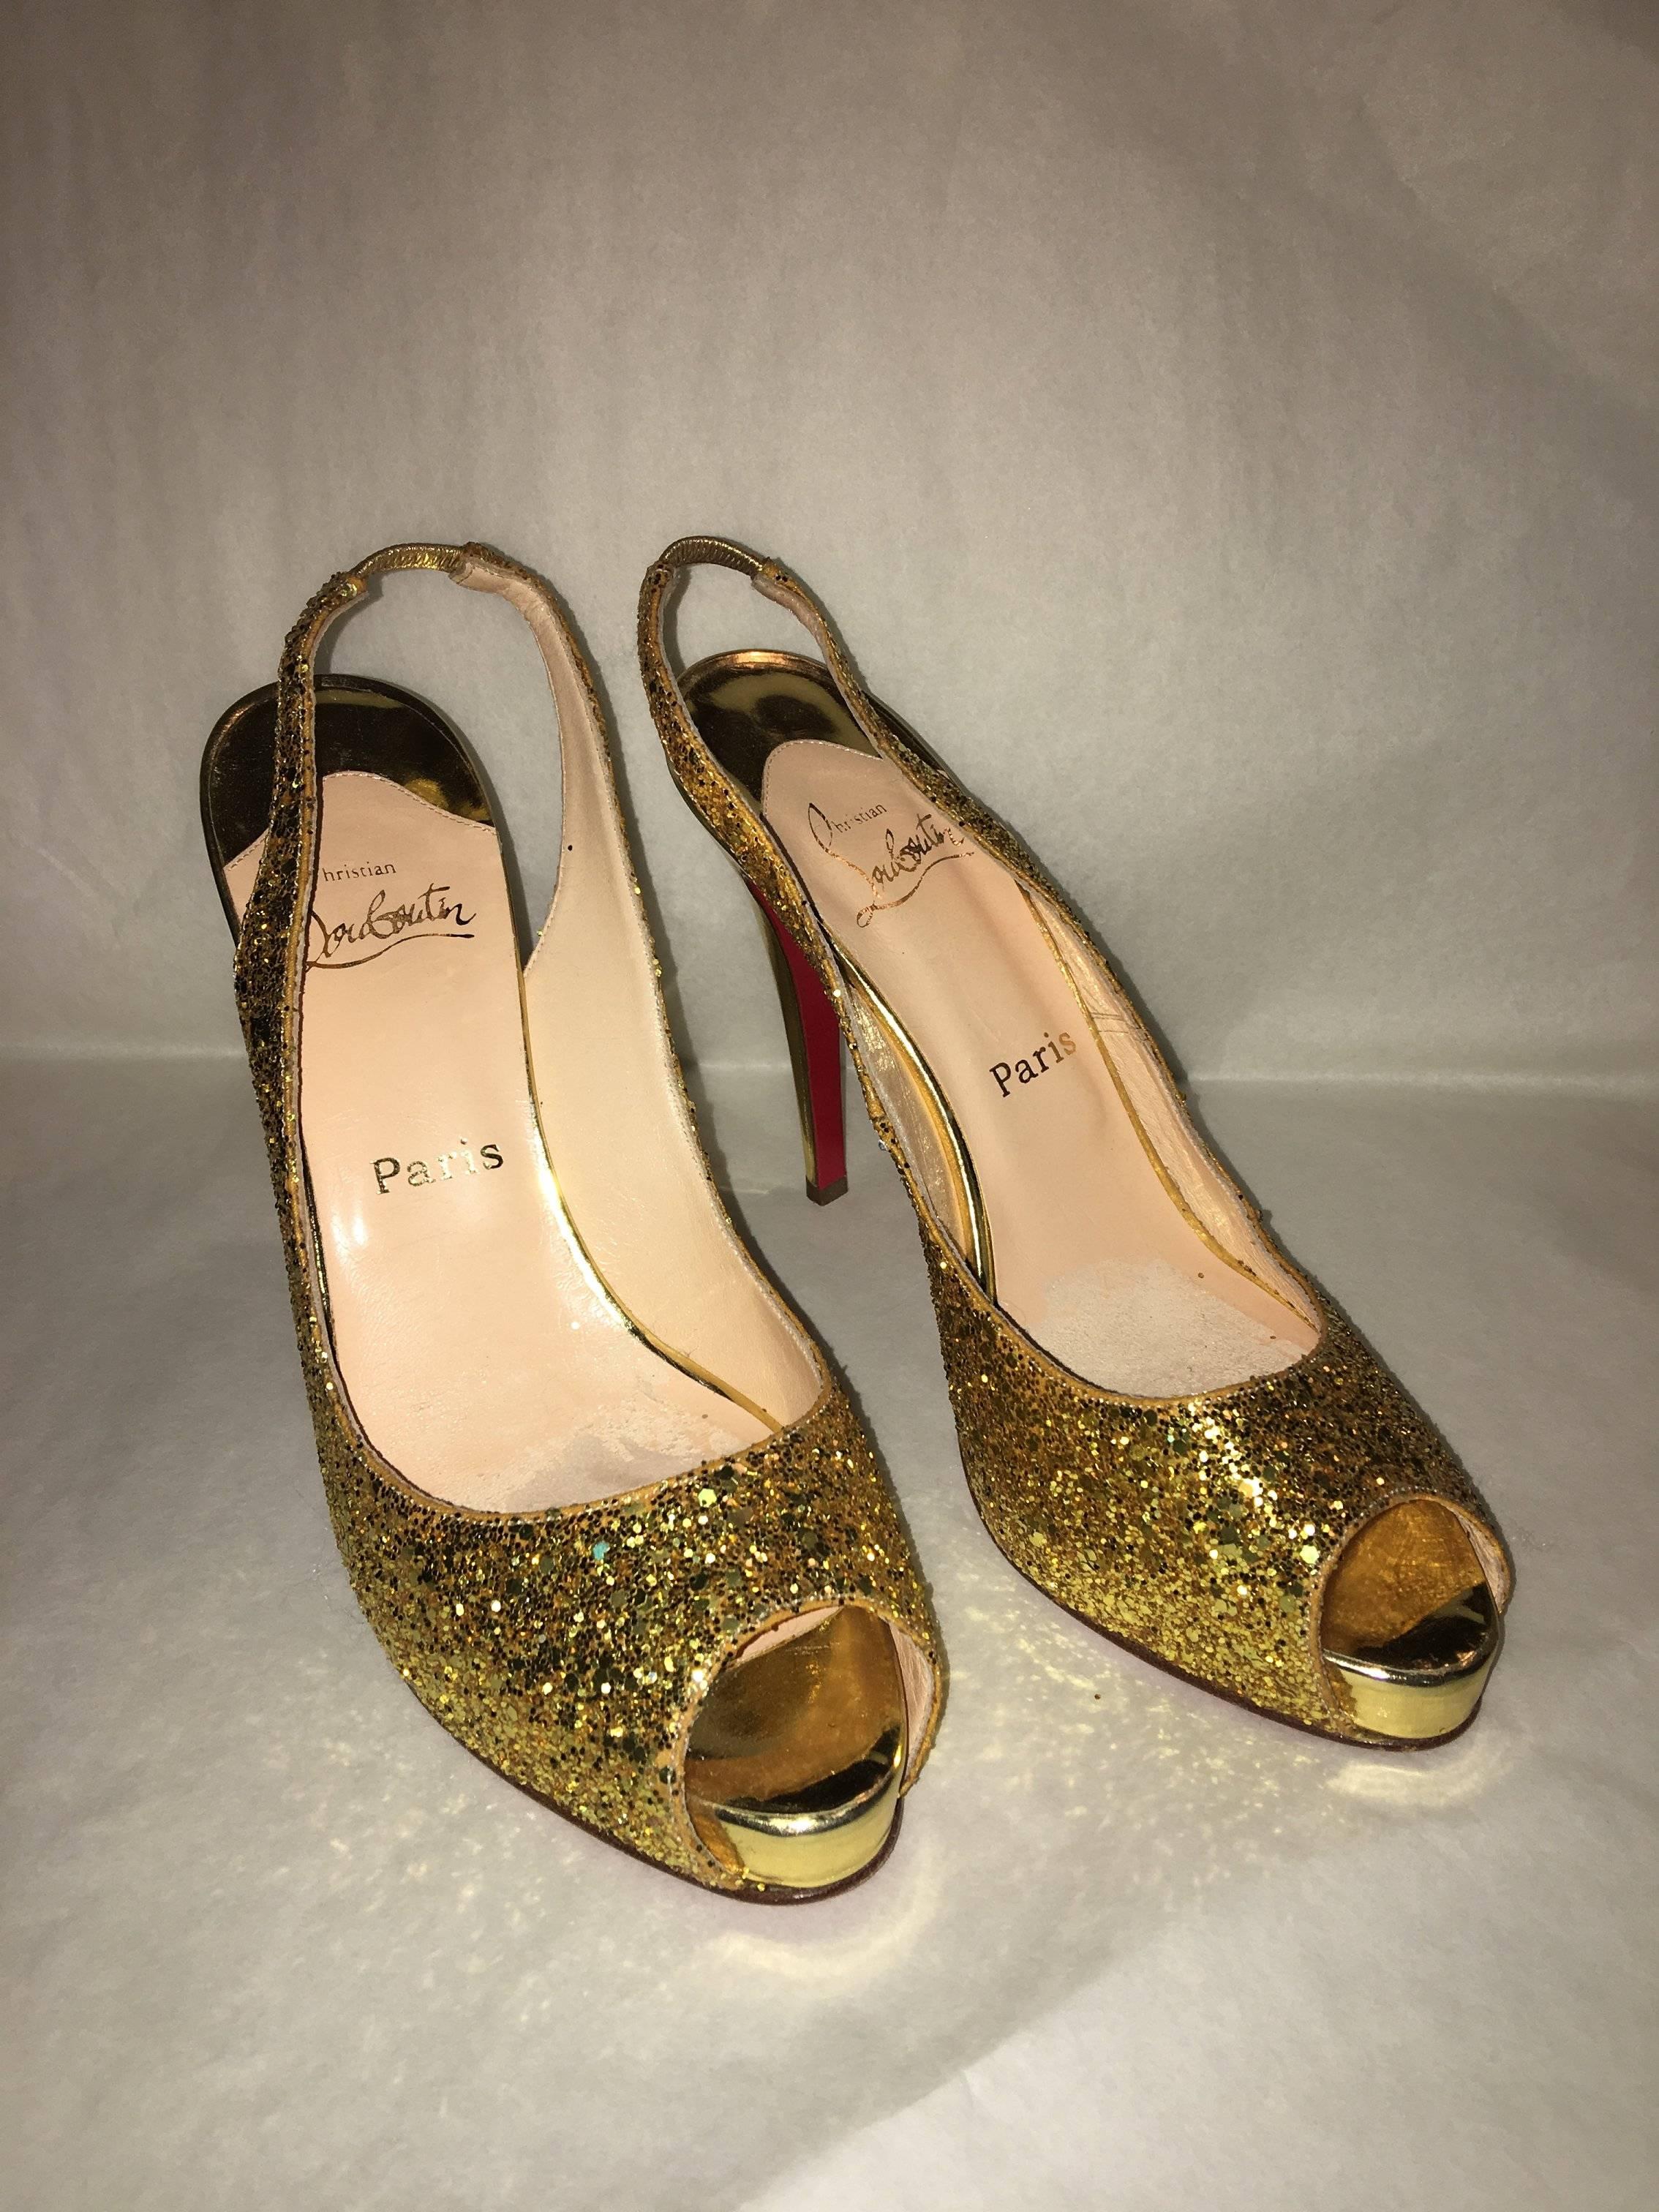 Lightly worn Christian Louboutin Gold Glitter Slingbacks. The highly coveted red bottom heels covered in glitzy gold glitter with a metallic gold heel. 